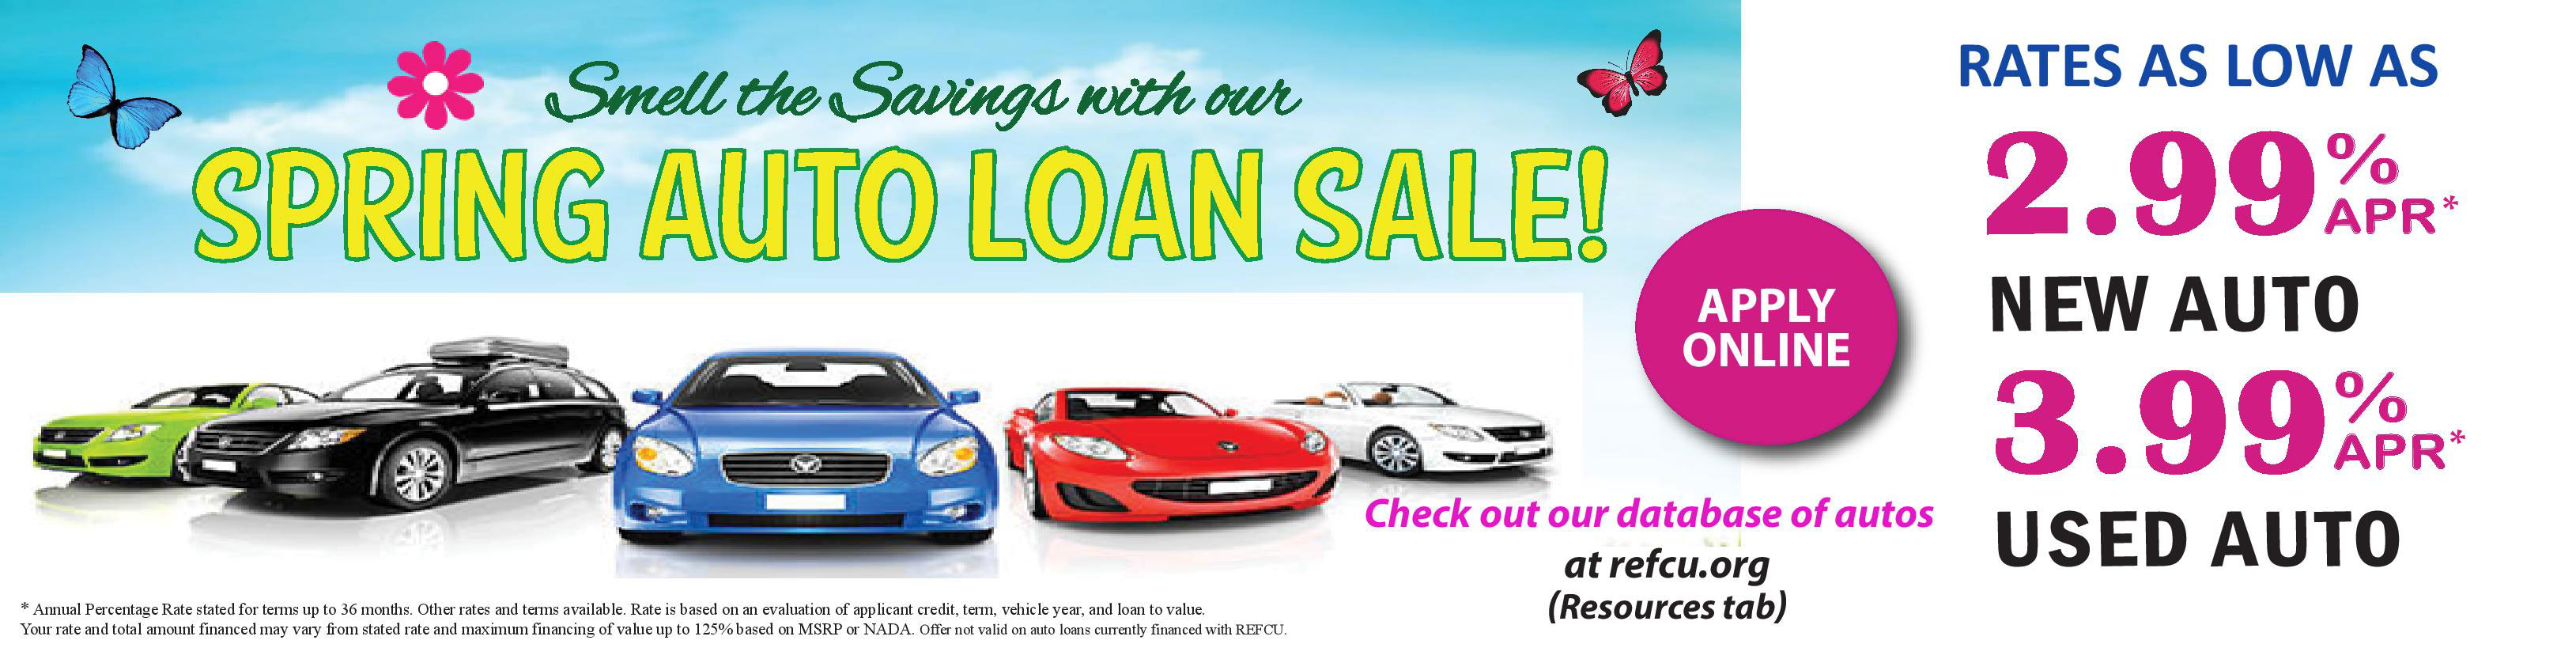 Smell the savings with our spring auto sale. Rates as low as 2.99% APR